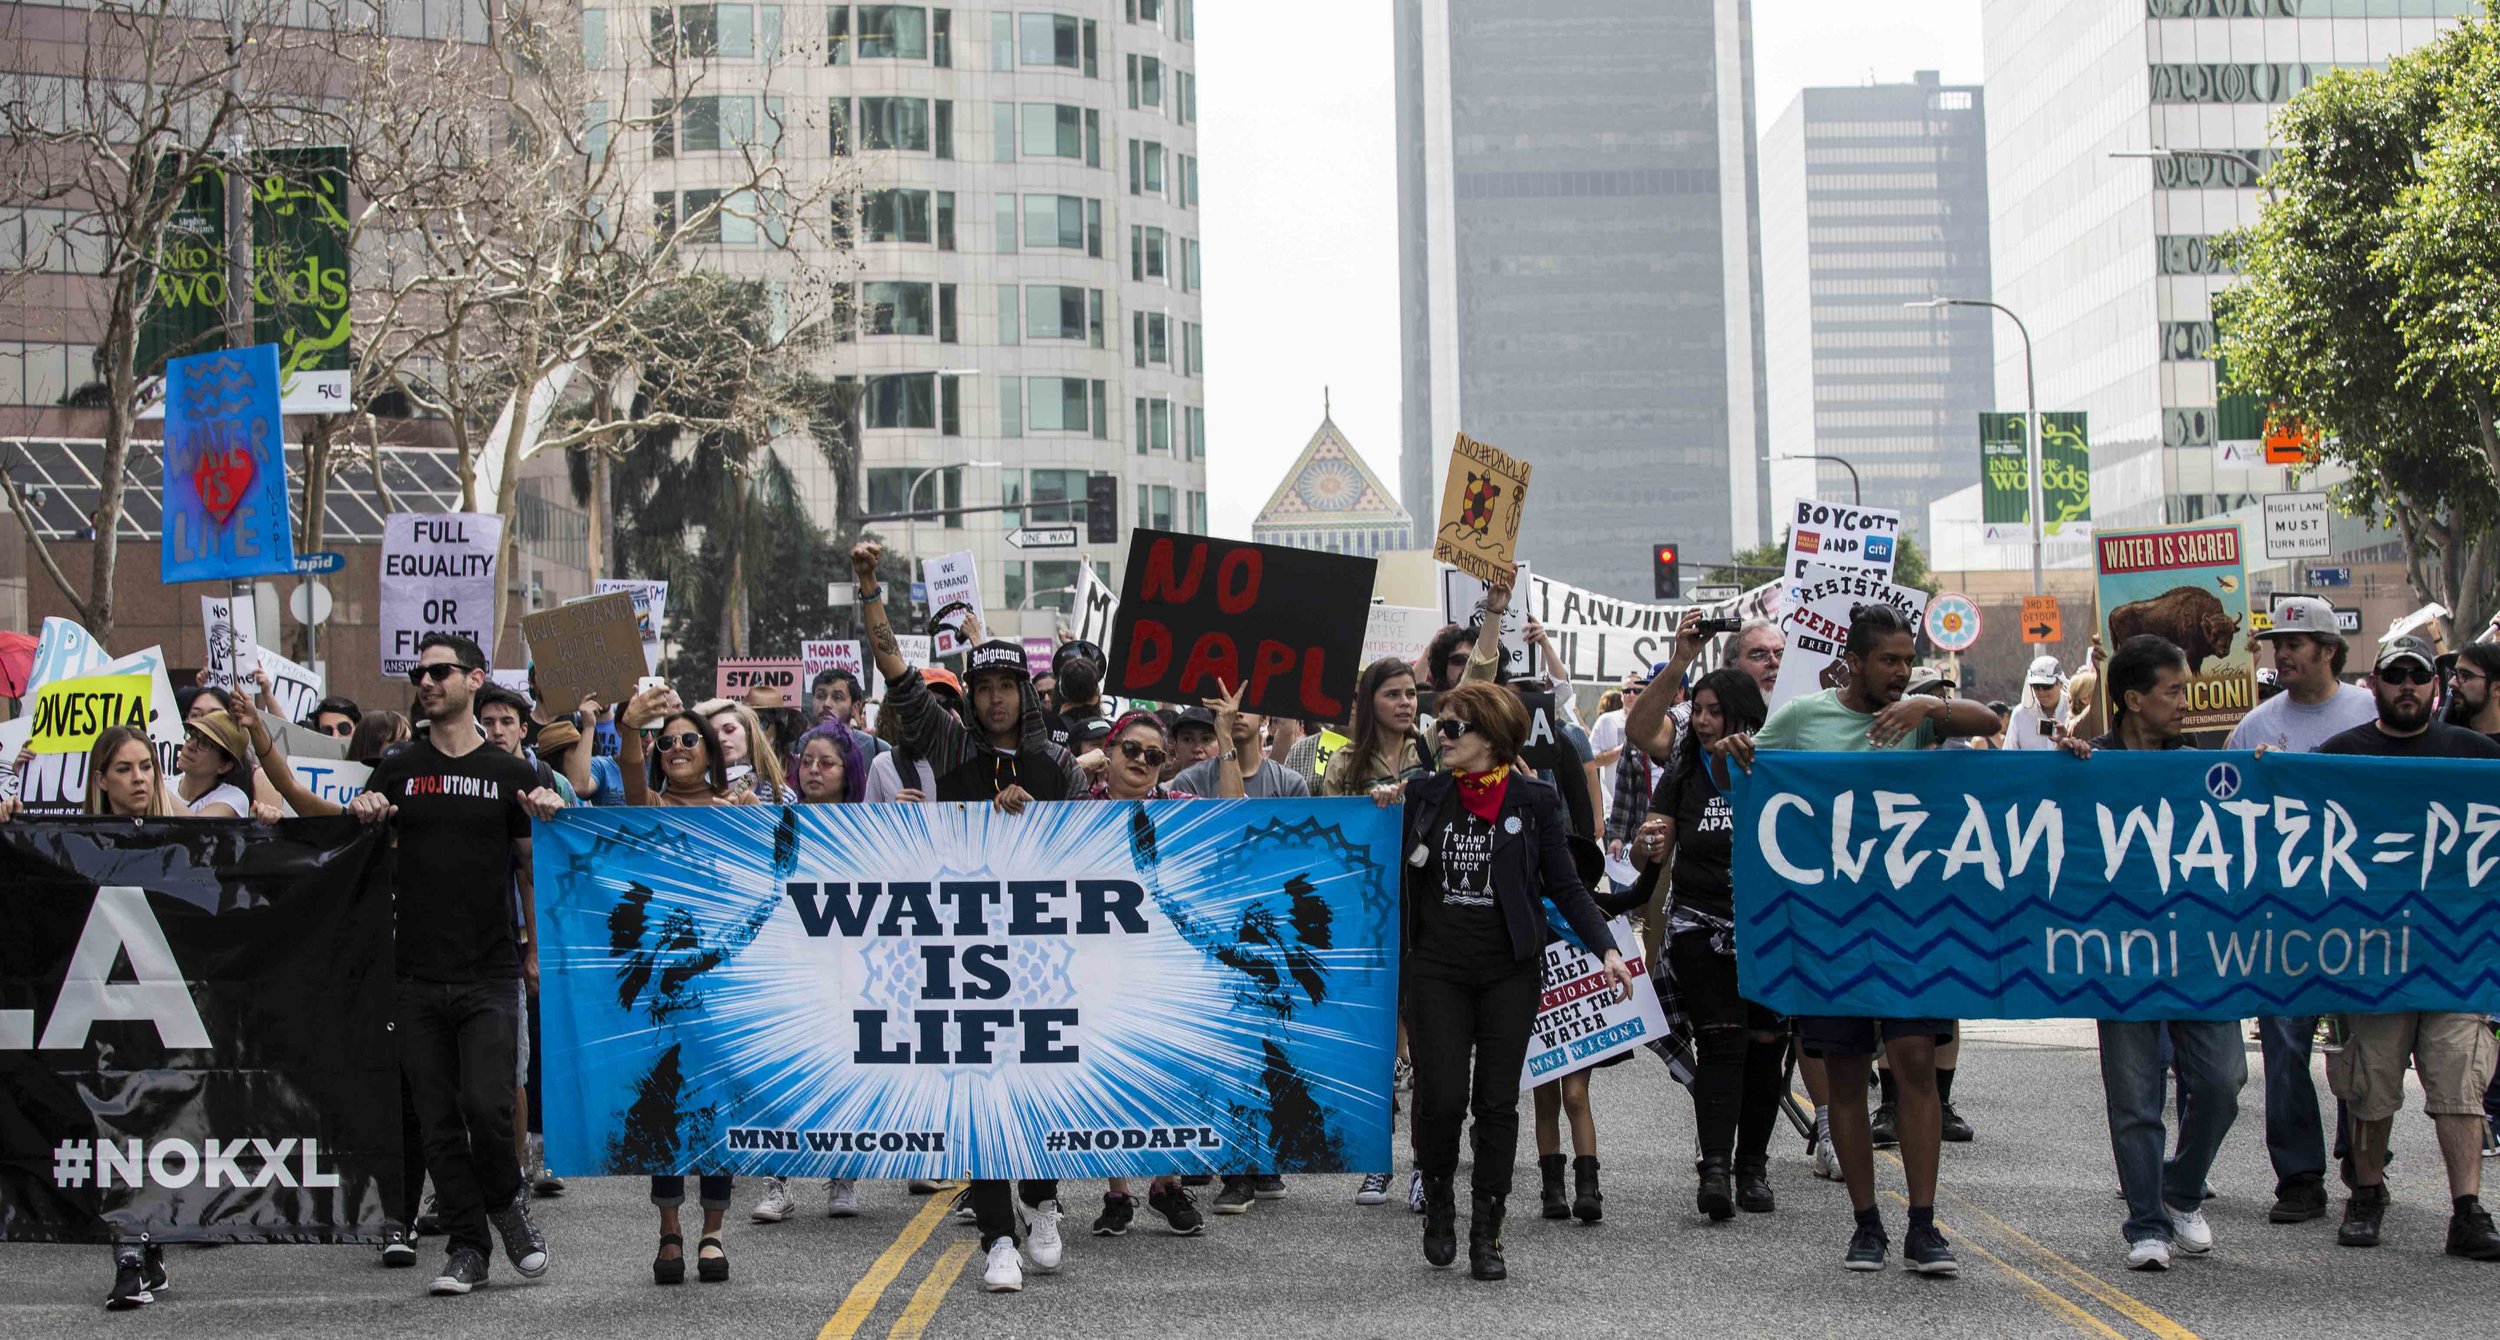  A coalition of activist groups carrying signs and chanting slogans march in opposition to the Dakota Access Pipeline in downtown Los Angeles Calif., on Friday, March 10, 2017. The group was calling on the city of Los Angeles to cut financial ties wi